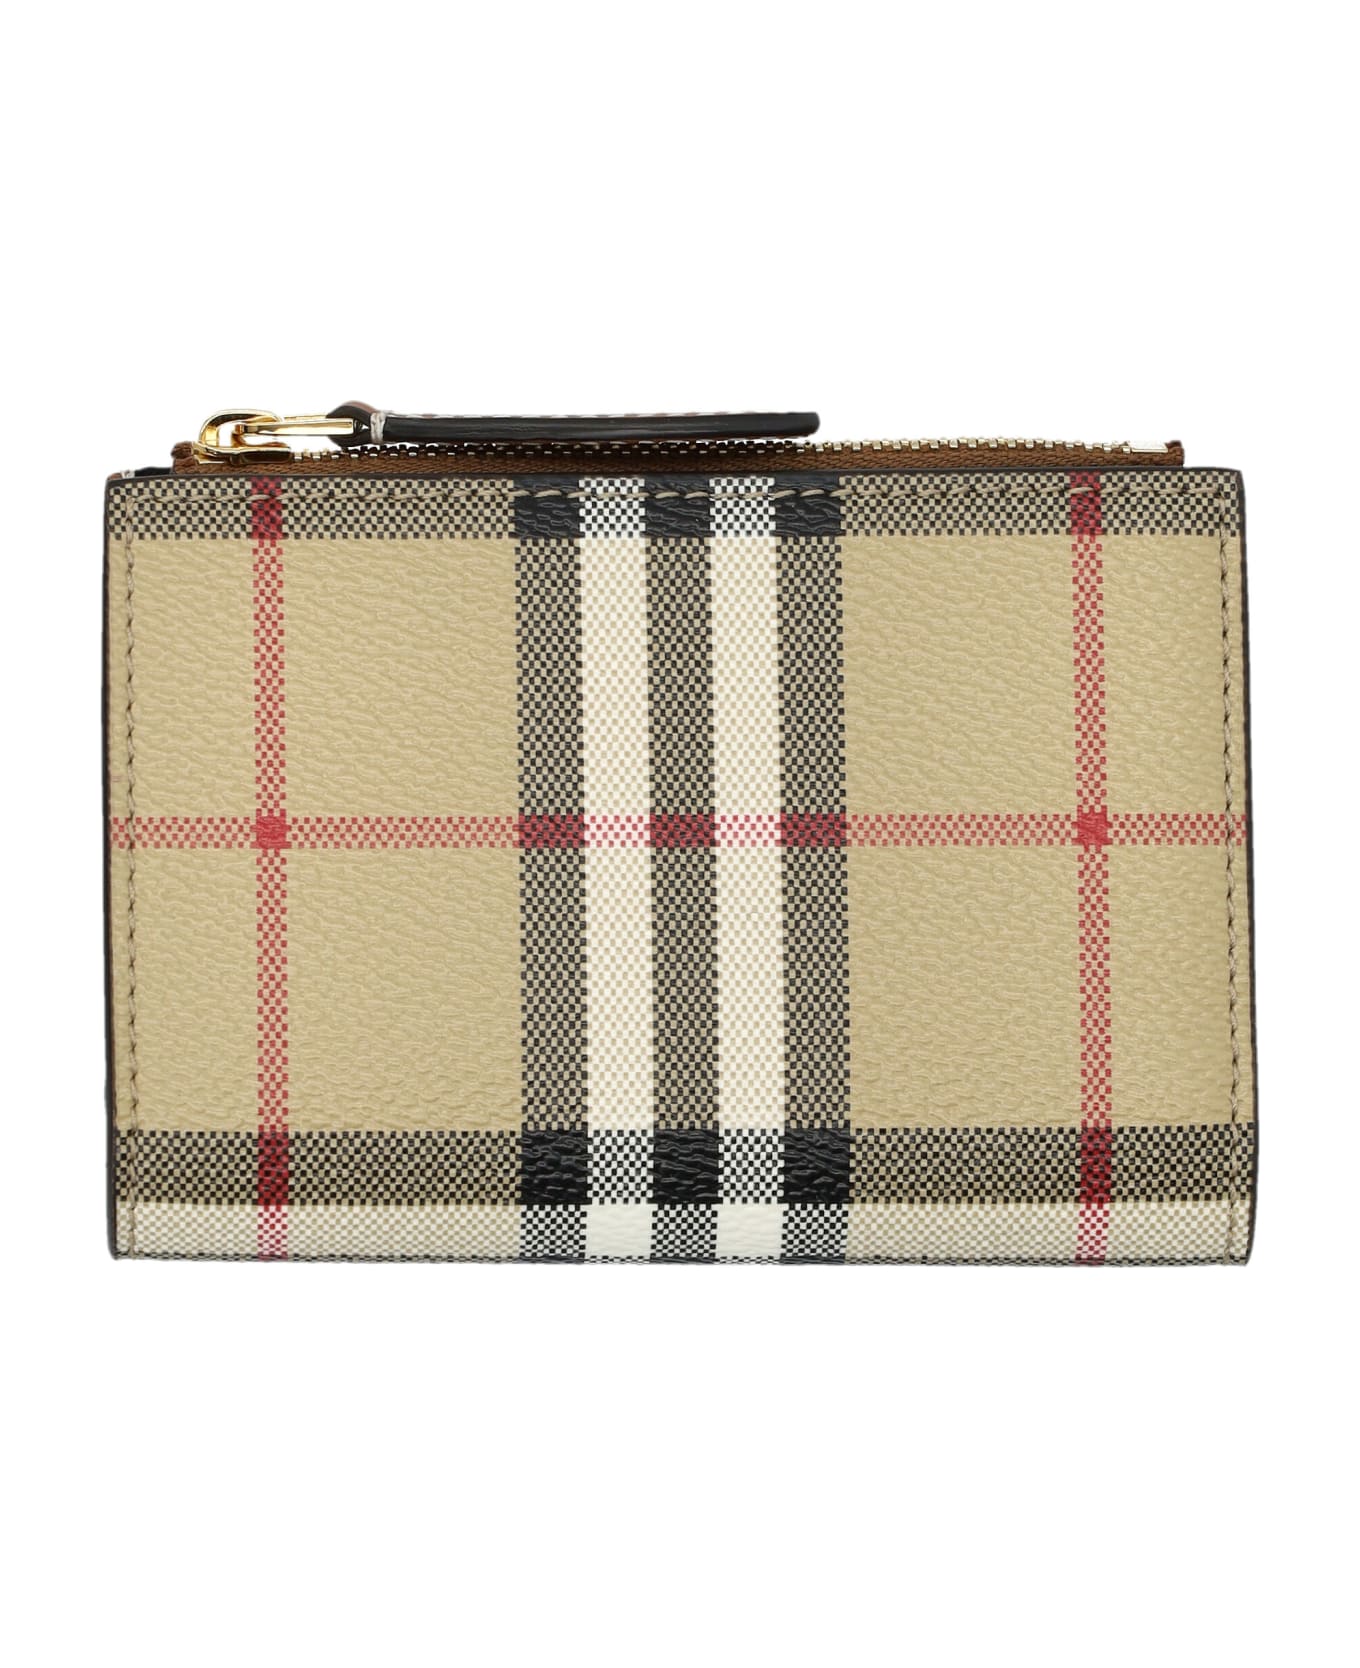 Burberry London Small Bifold Wallet - ARCHIVE BEIGE CHECK